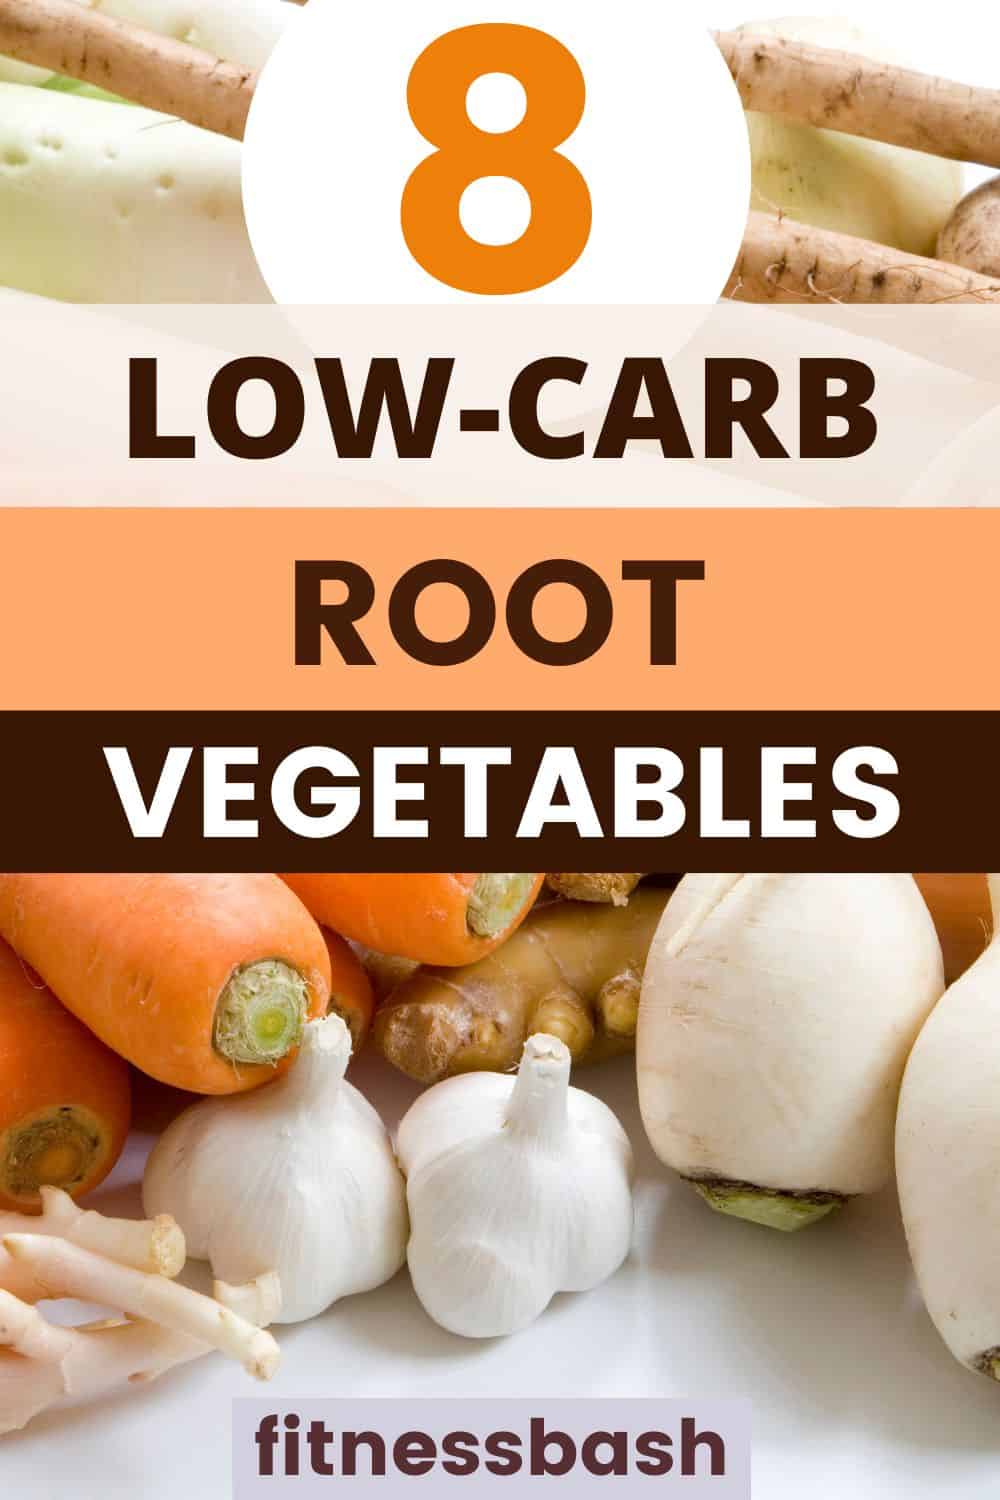 low-carb root vegetables